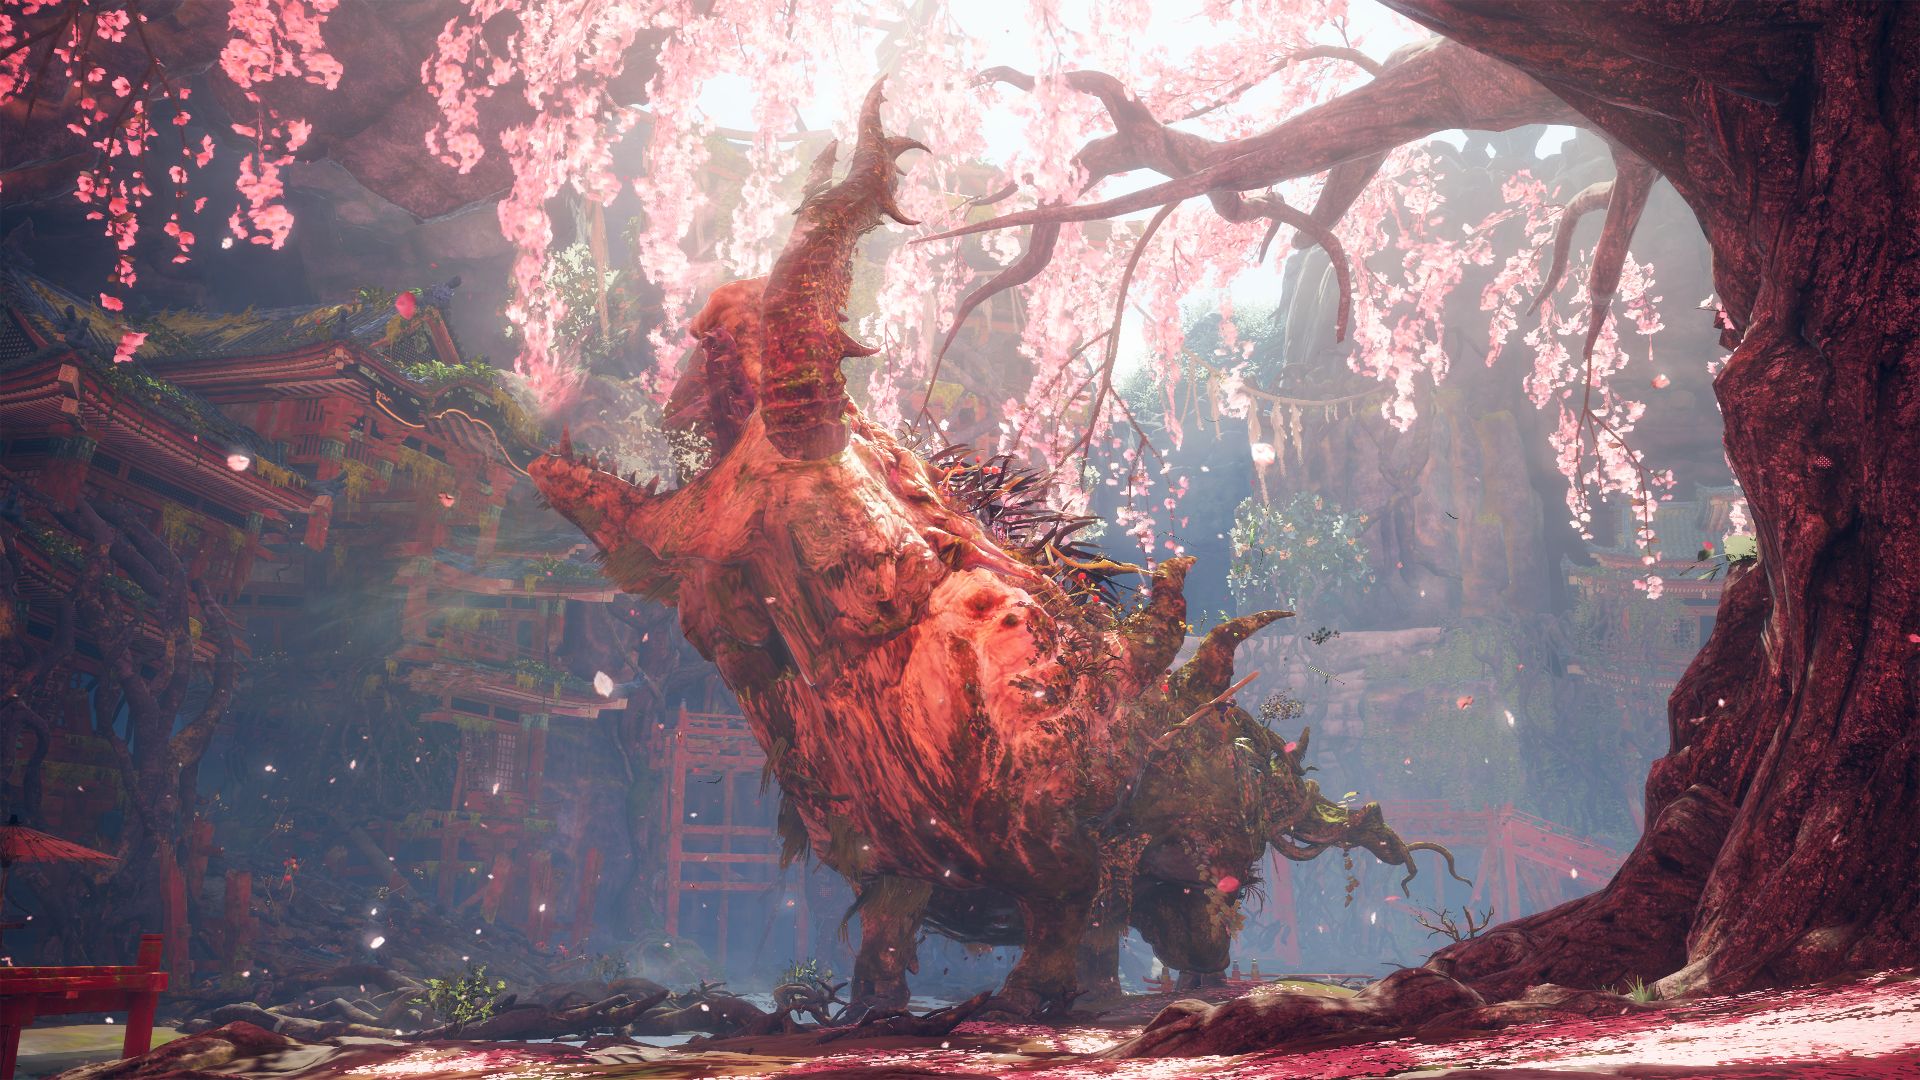 A giant beast roars in a mystical pink forest in Wild Hearts.